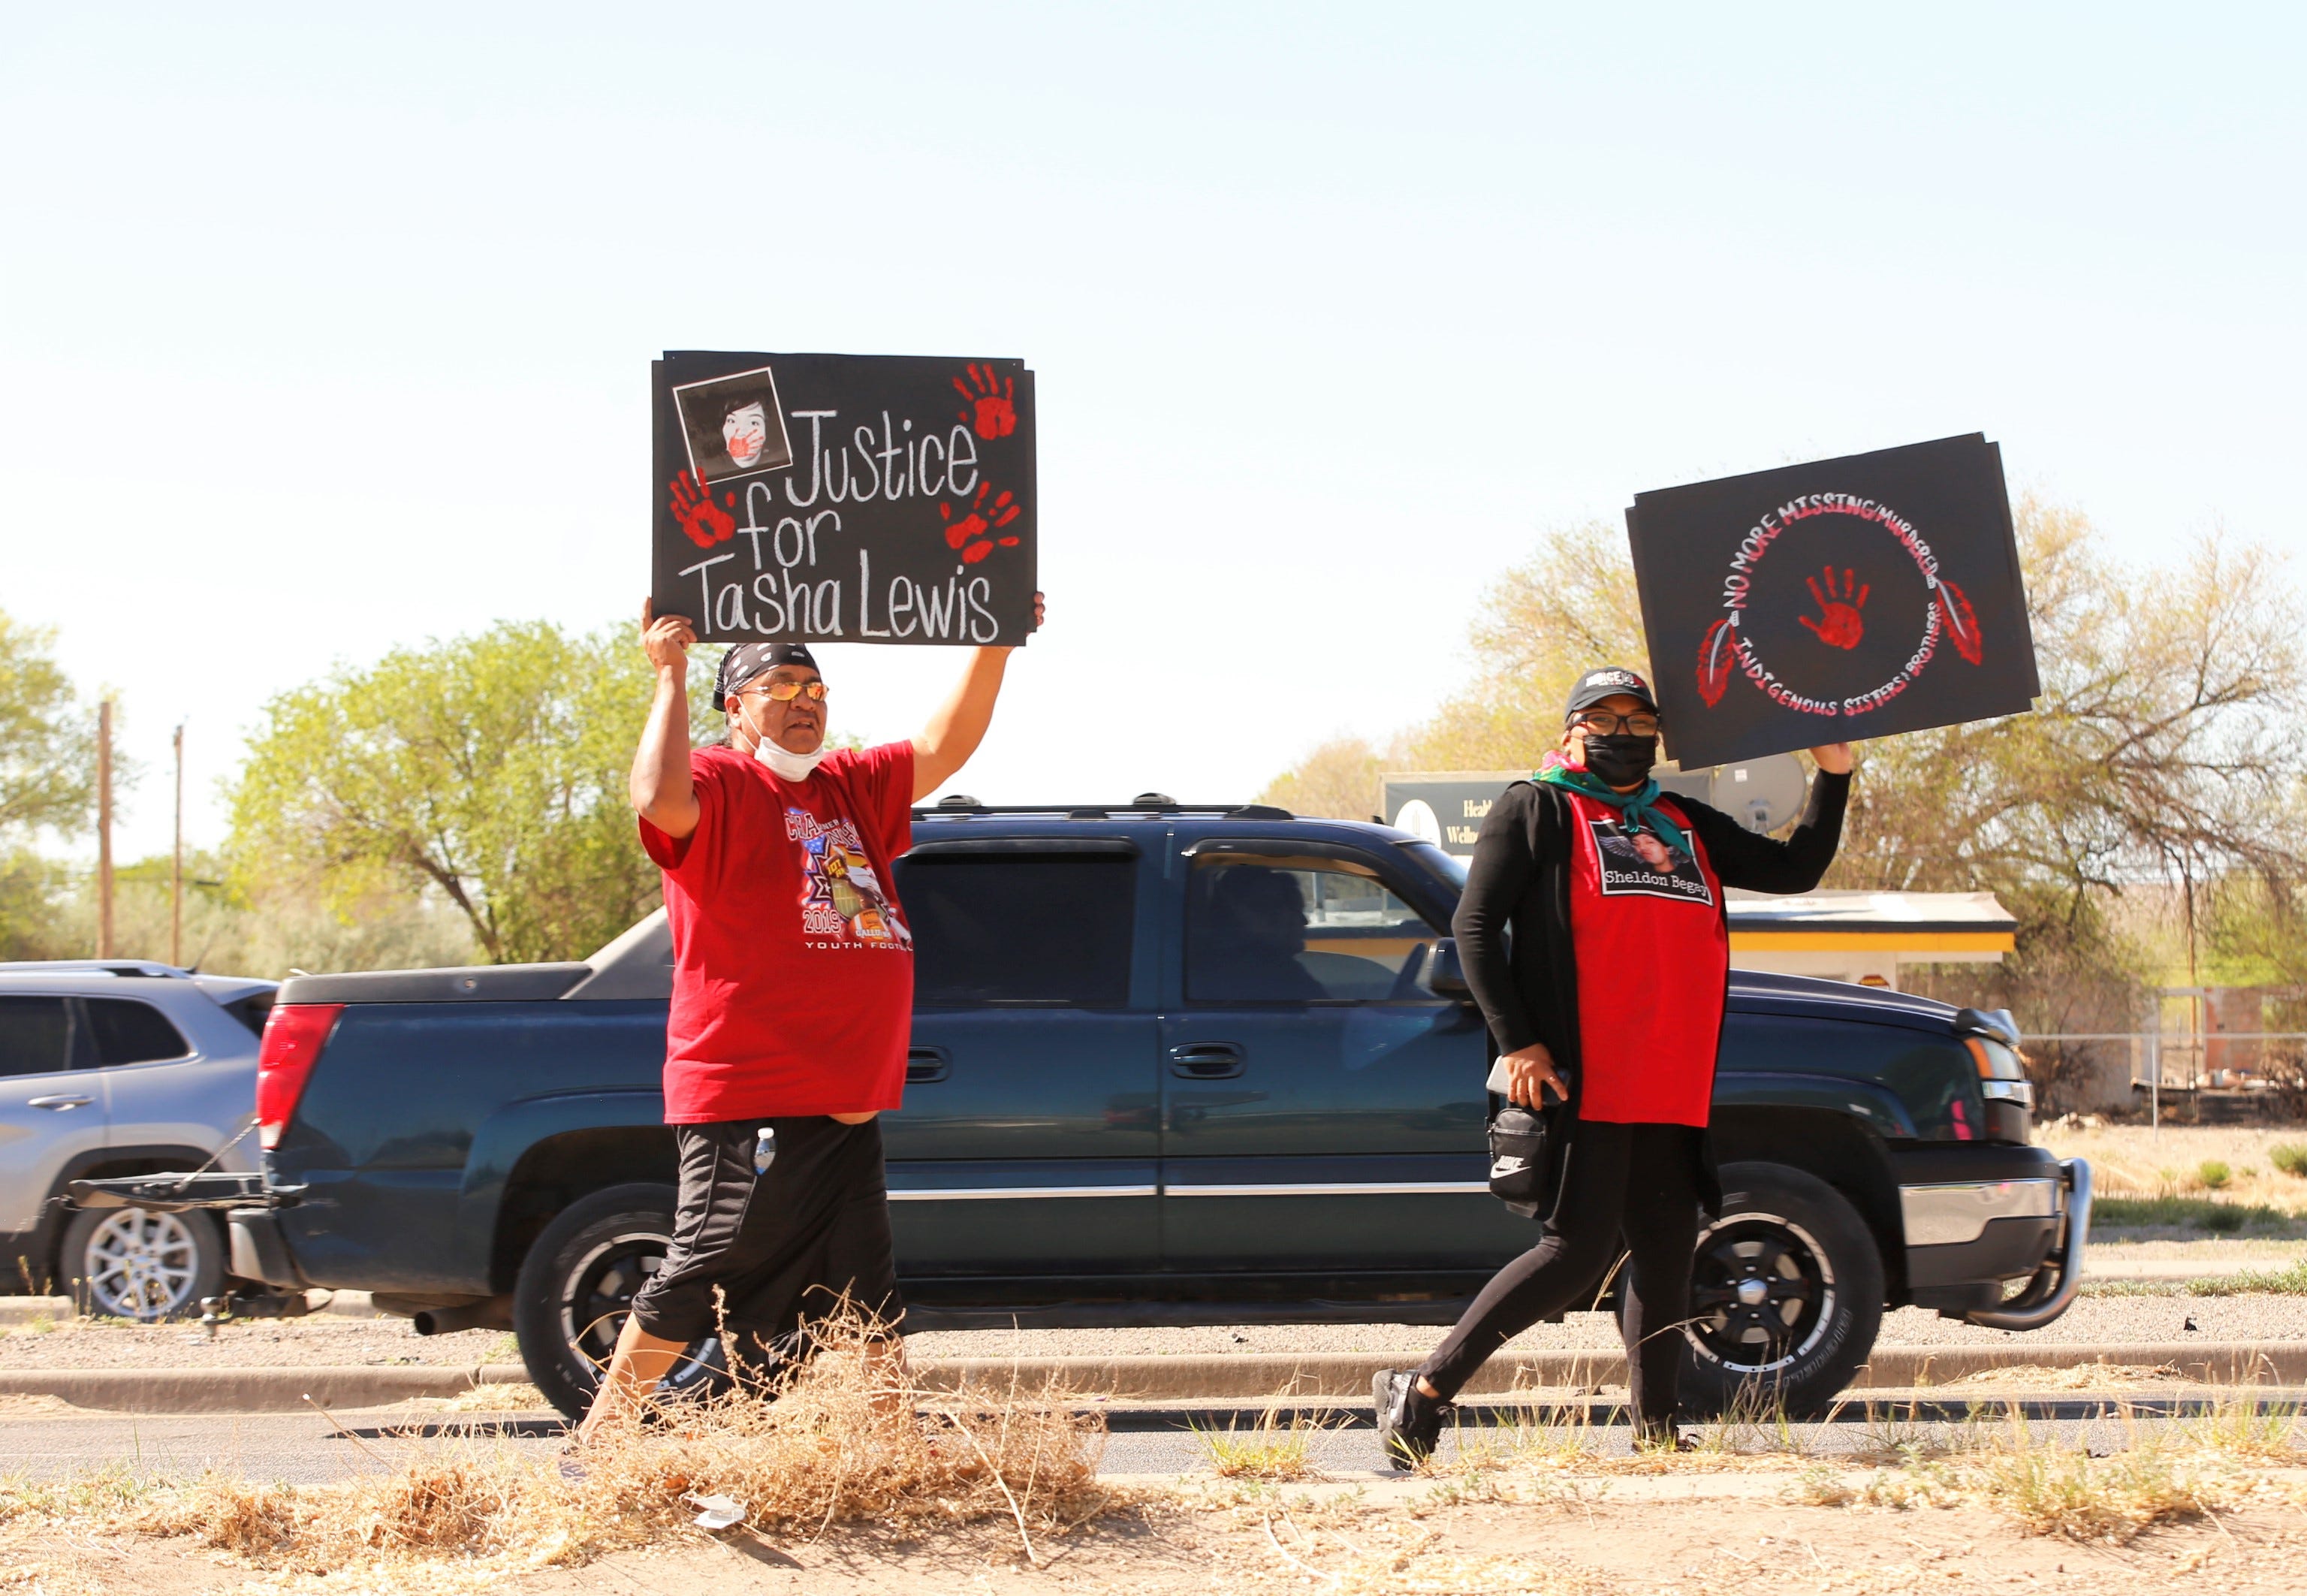 Signs remember Tasha Lewis, a 29-year-old Navajo woman who died on March 31 in Thoreau, and remembered by family members at the Missing and Murdered Indigenous Women walk on May 5 in Shiprock. Family members question the circumstances of her death and the investigation by law enforcement.